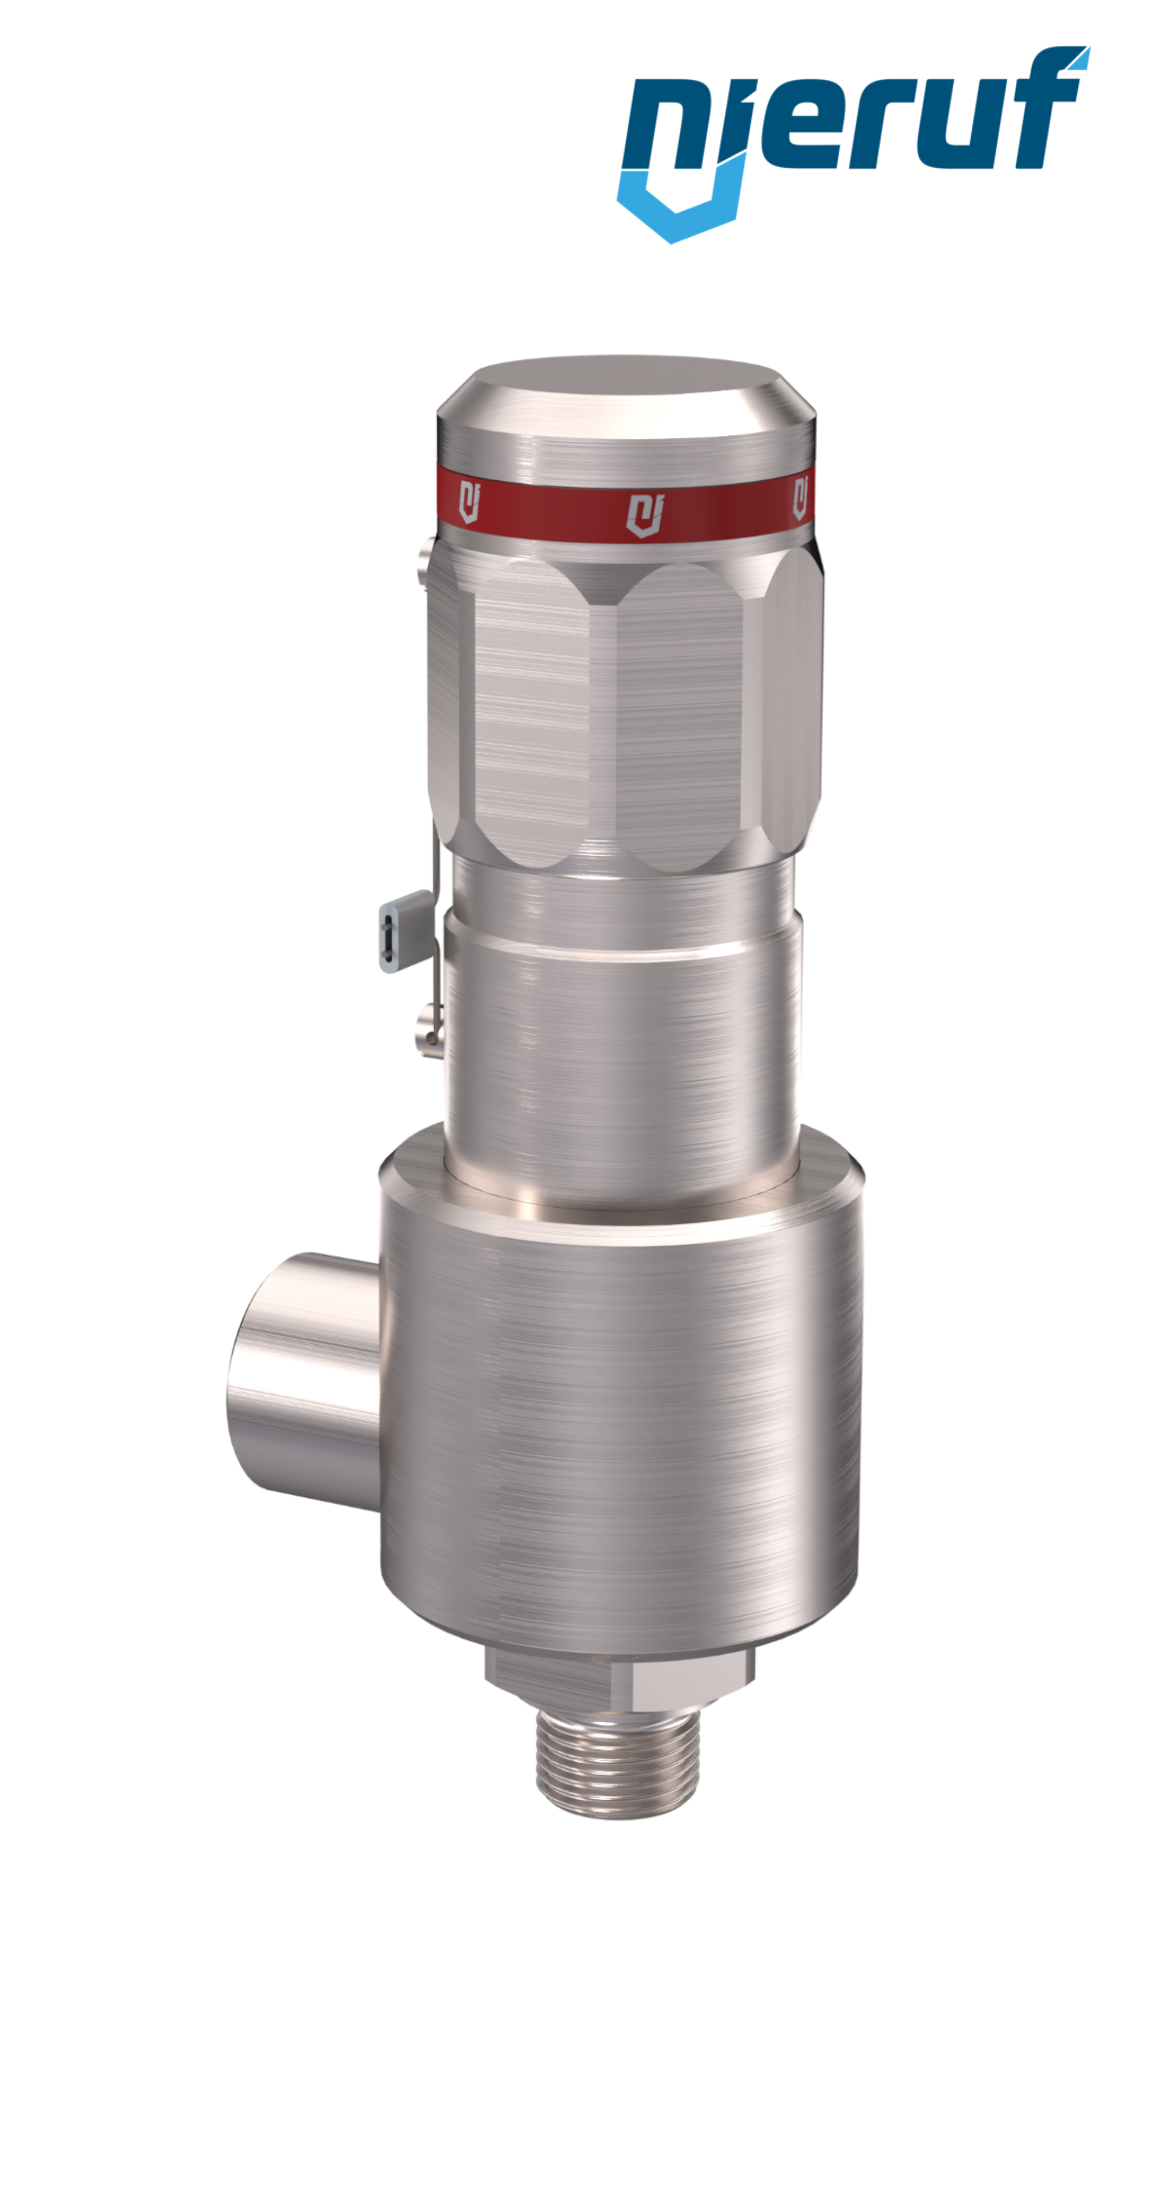 High-pressure safety valve 1/4" m x 1/2" fm SV15, stainless steel MD / PAI, without lifting device